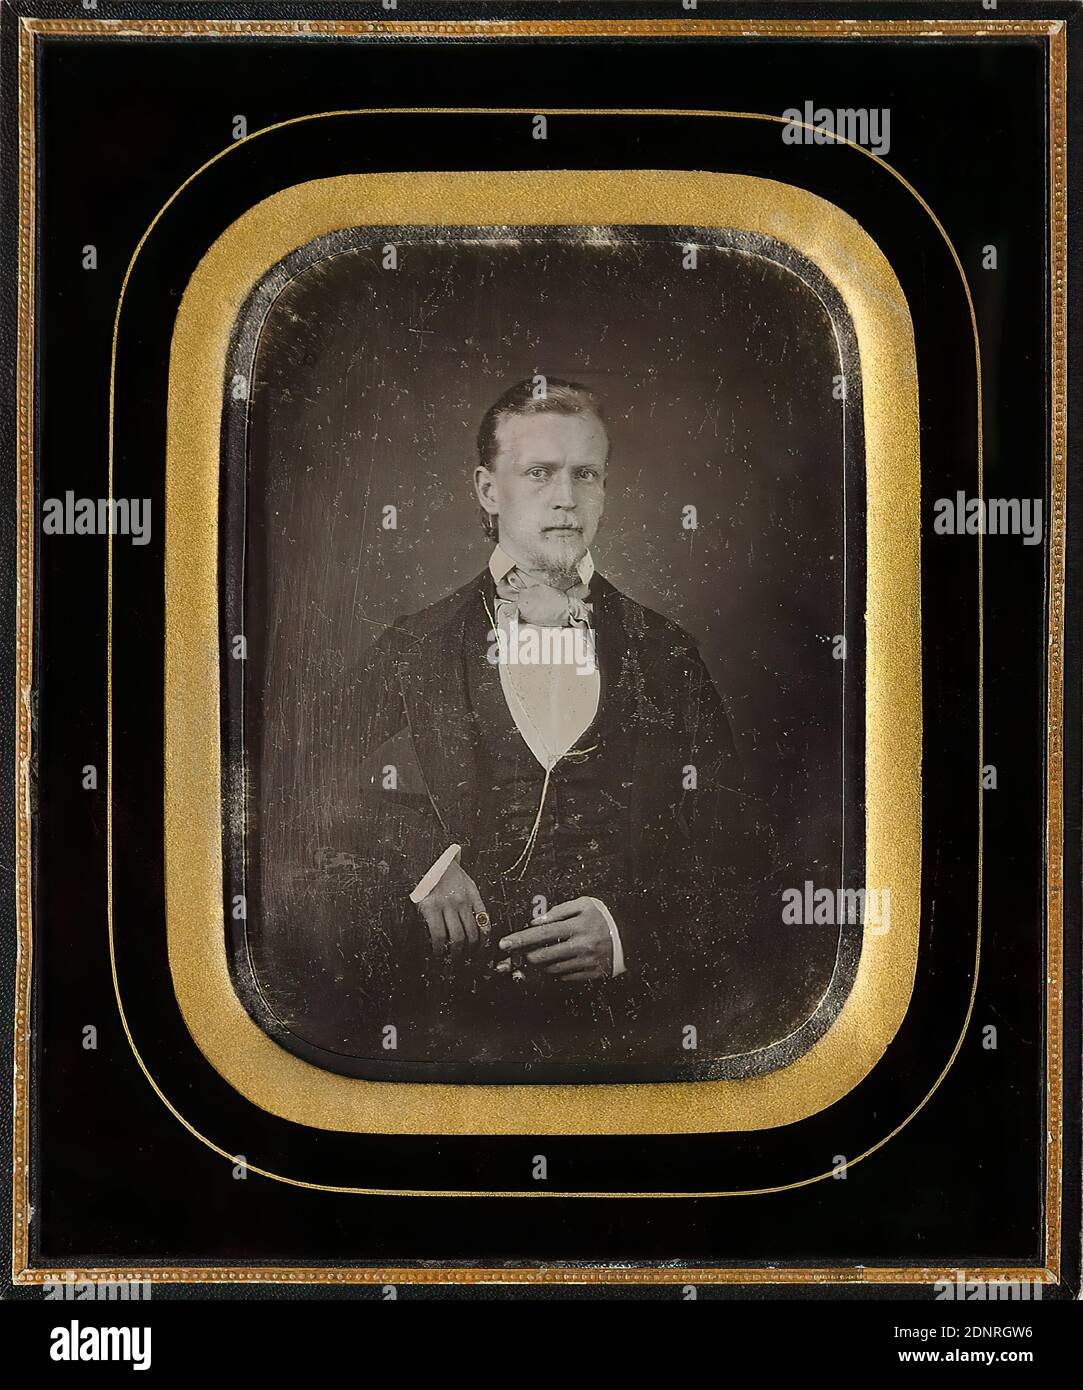 Adolf Hansen (1825-1889) Mexico 1850, daguerreotype, picture size: height: 11,80 cm; width: 8,50 cm, in ink: in 1850 in Mexico 1 ounce cost 56,-, my age then 25 years, on label: D. p. 301, portrait photography, man, sitting figure, half-figure portrait Stock Photo